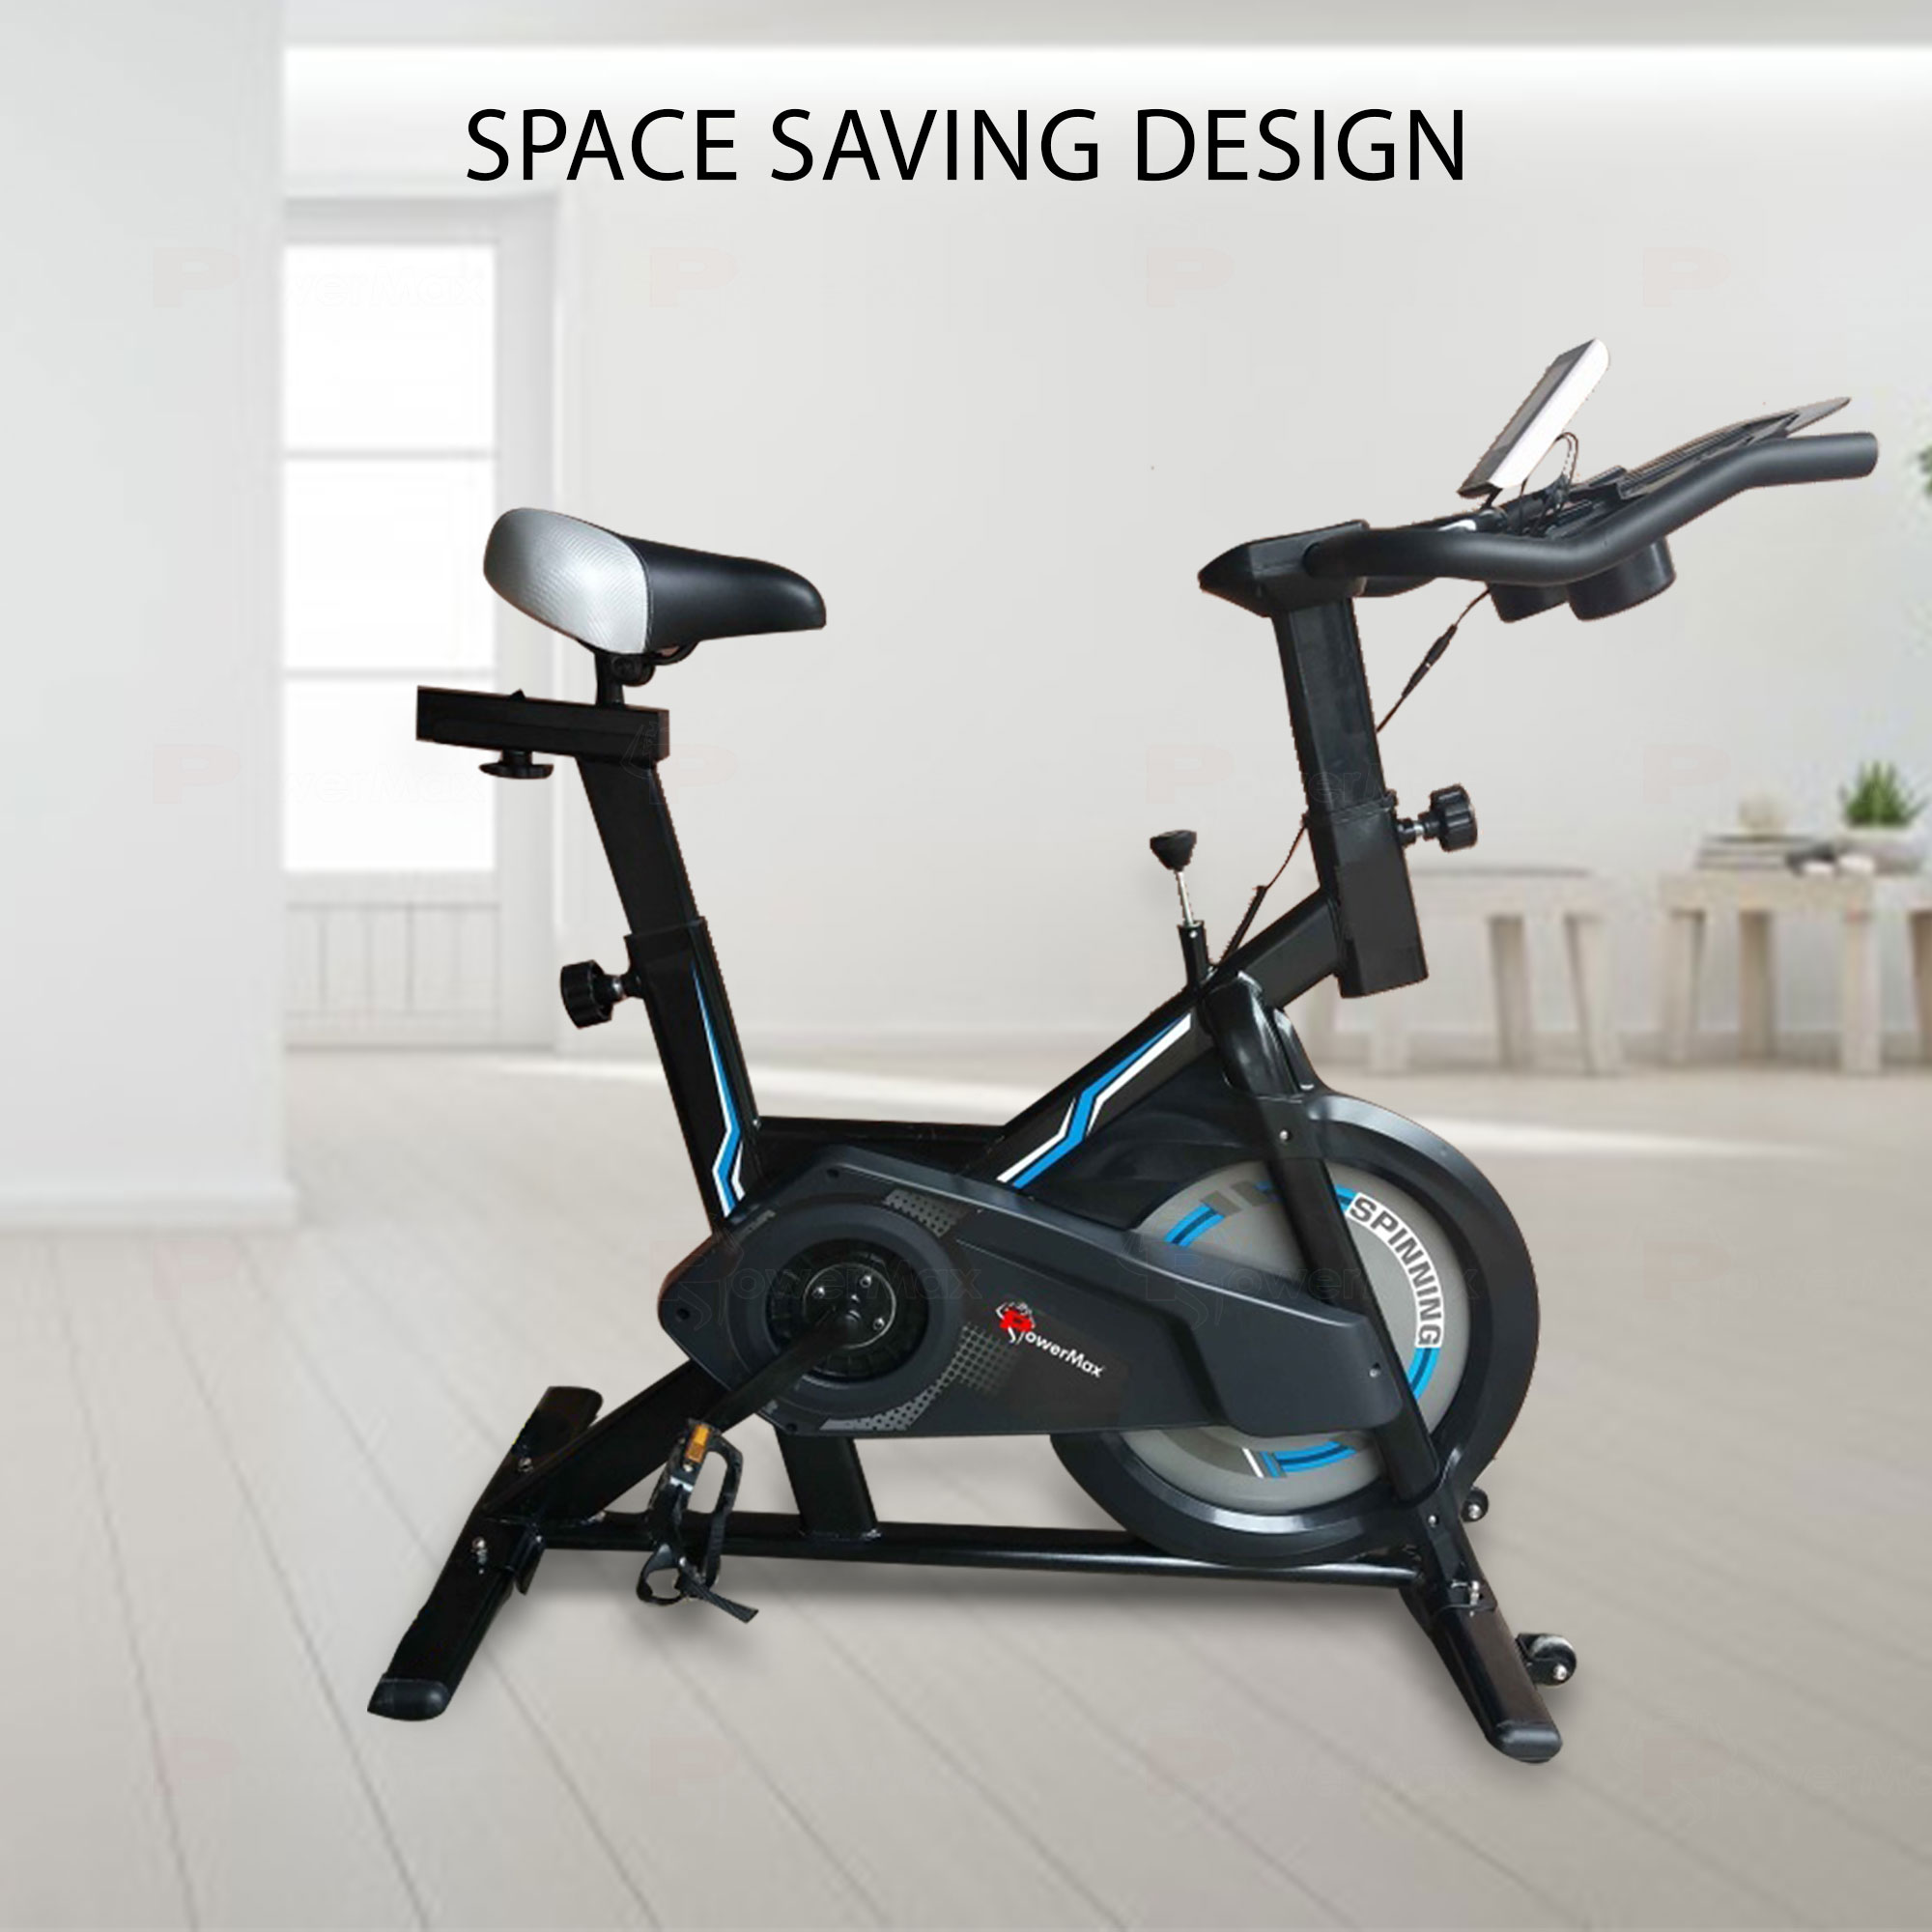 Home Use Spin Bike /Group Bike with iPad & Bottle holder